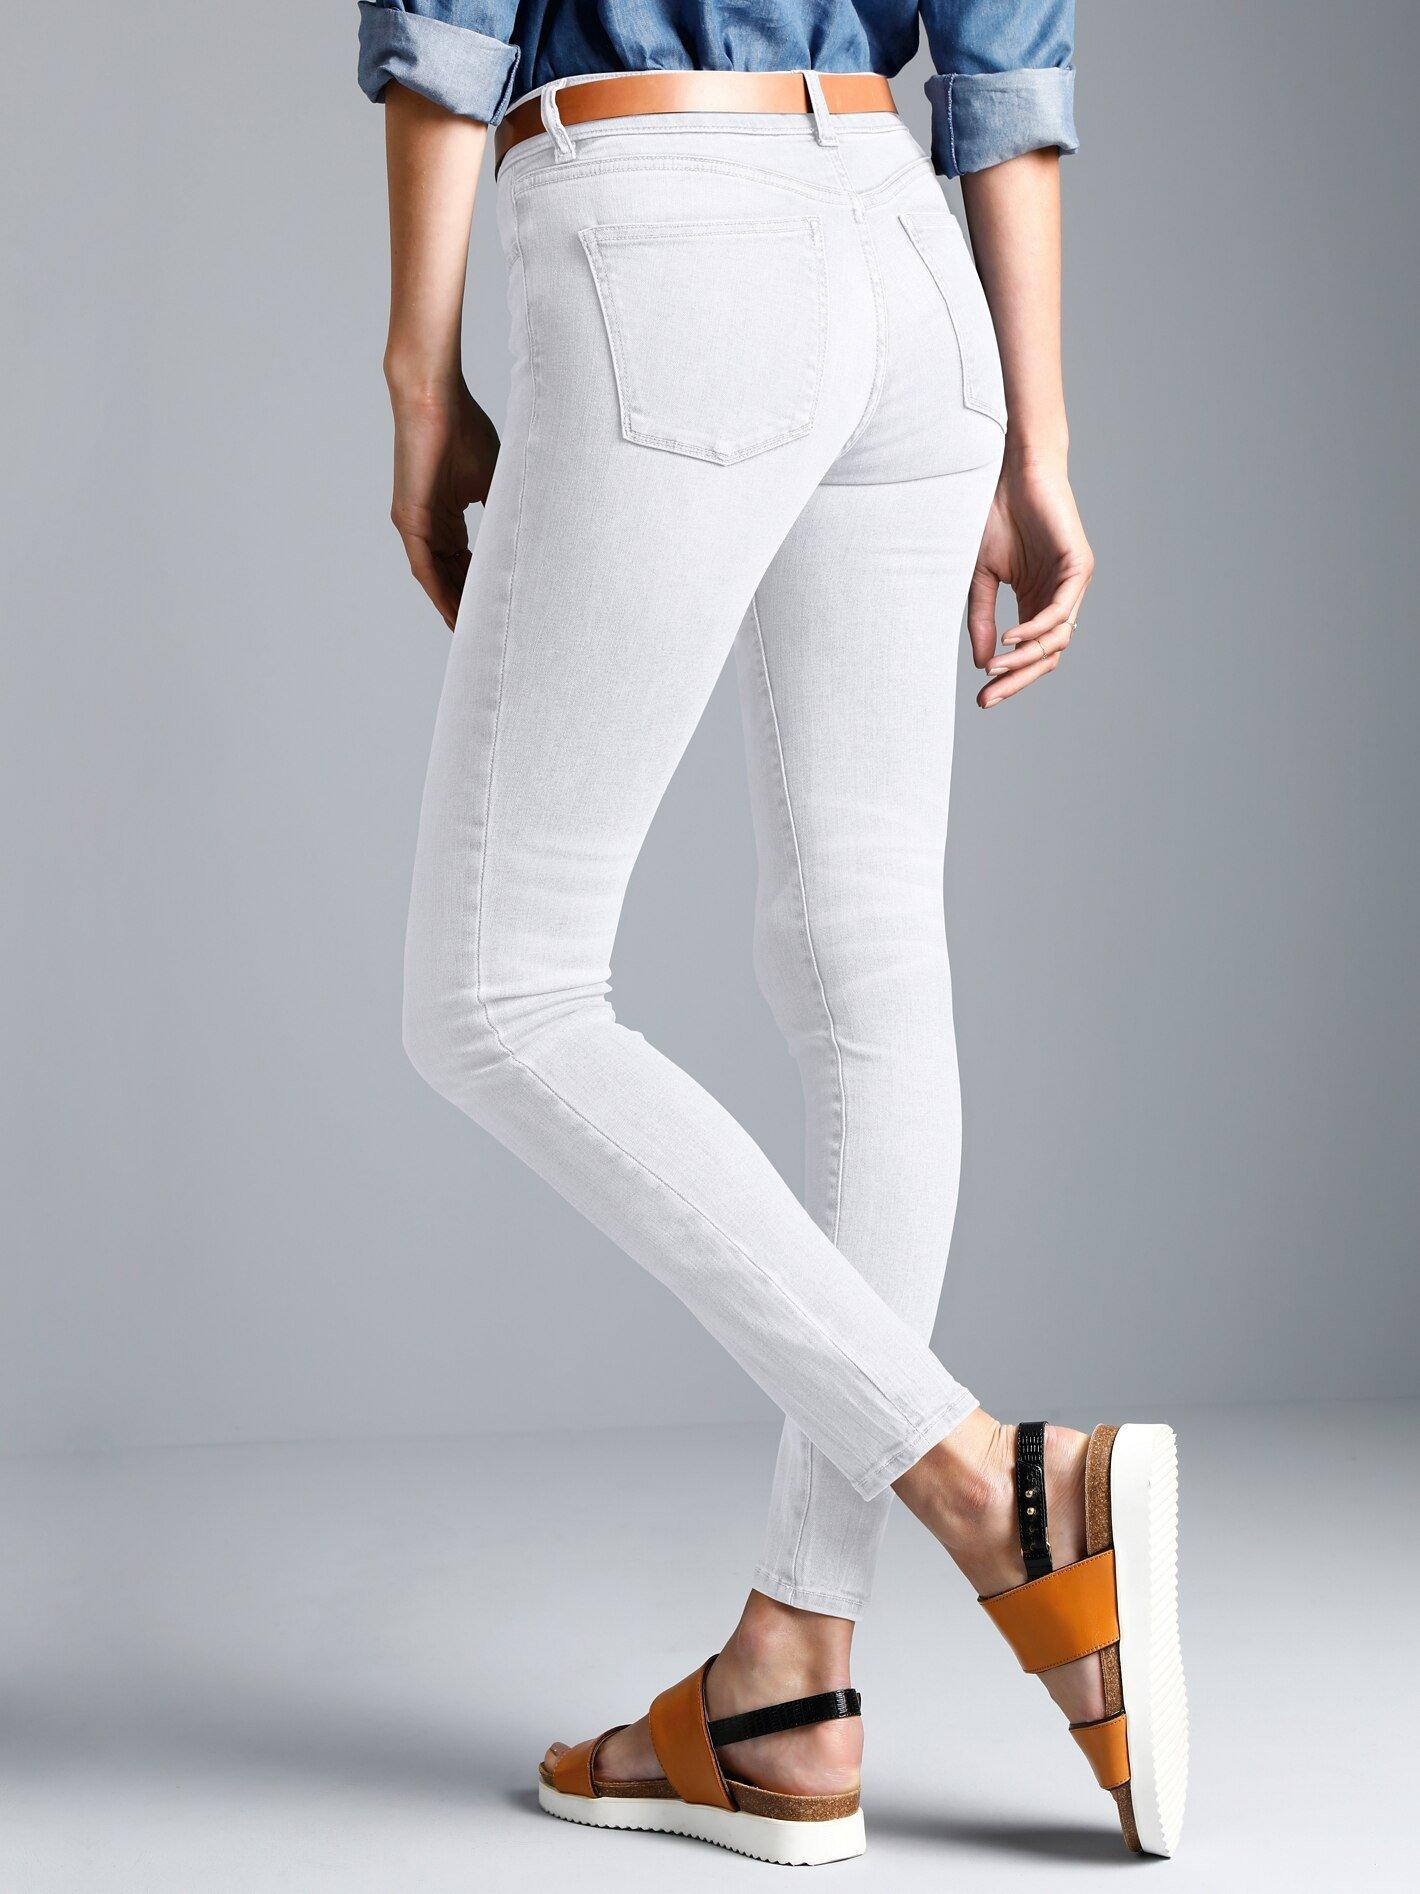 white ankle length jeans